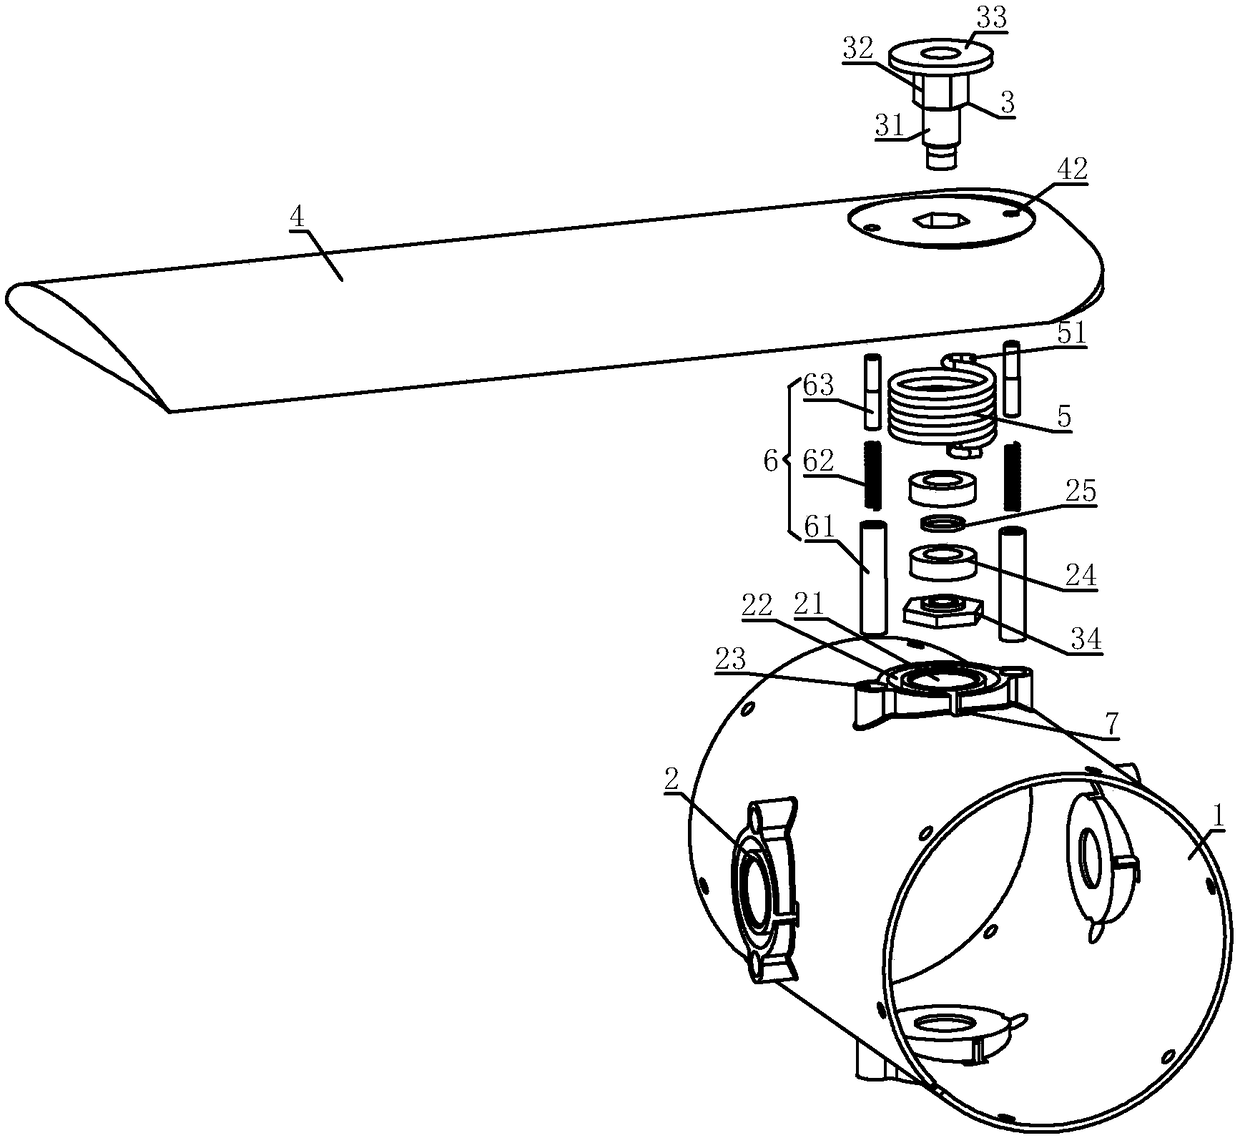 A self-locking folding unmanned aerial vehicle with stably rotating wings